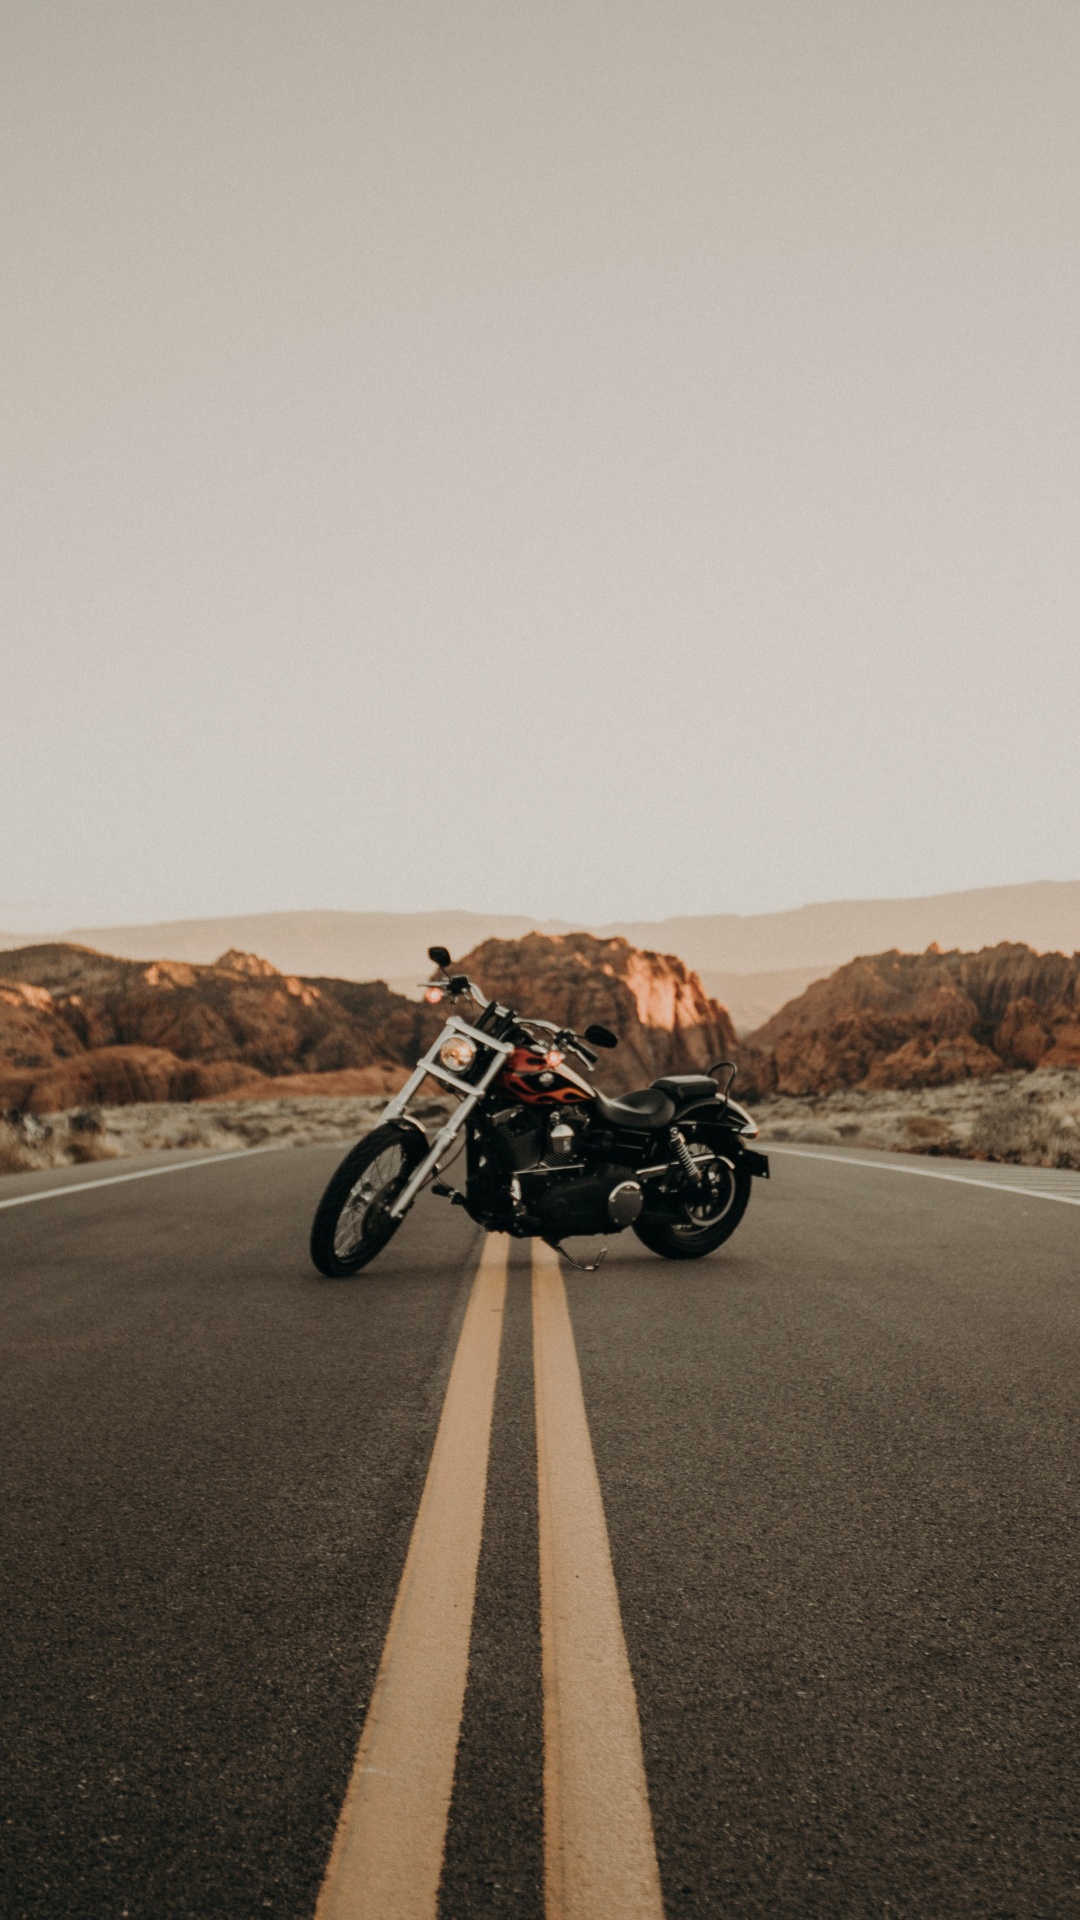 Black and White Motorcycle on Road During Daytime. Wallpaper in 1080x1920 Resolution